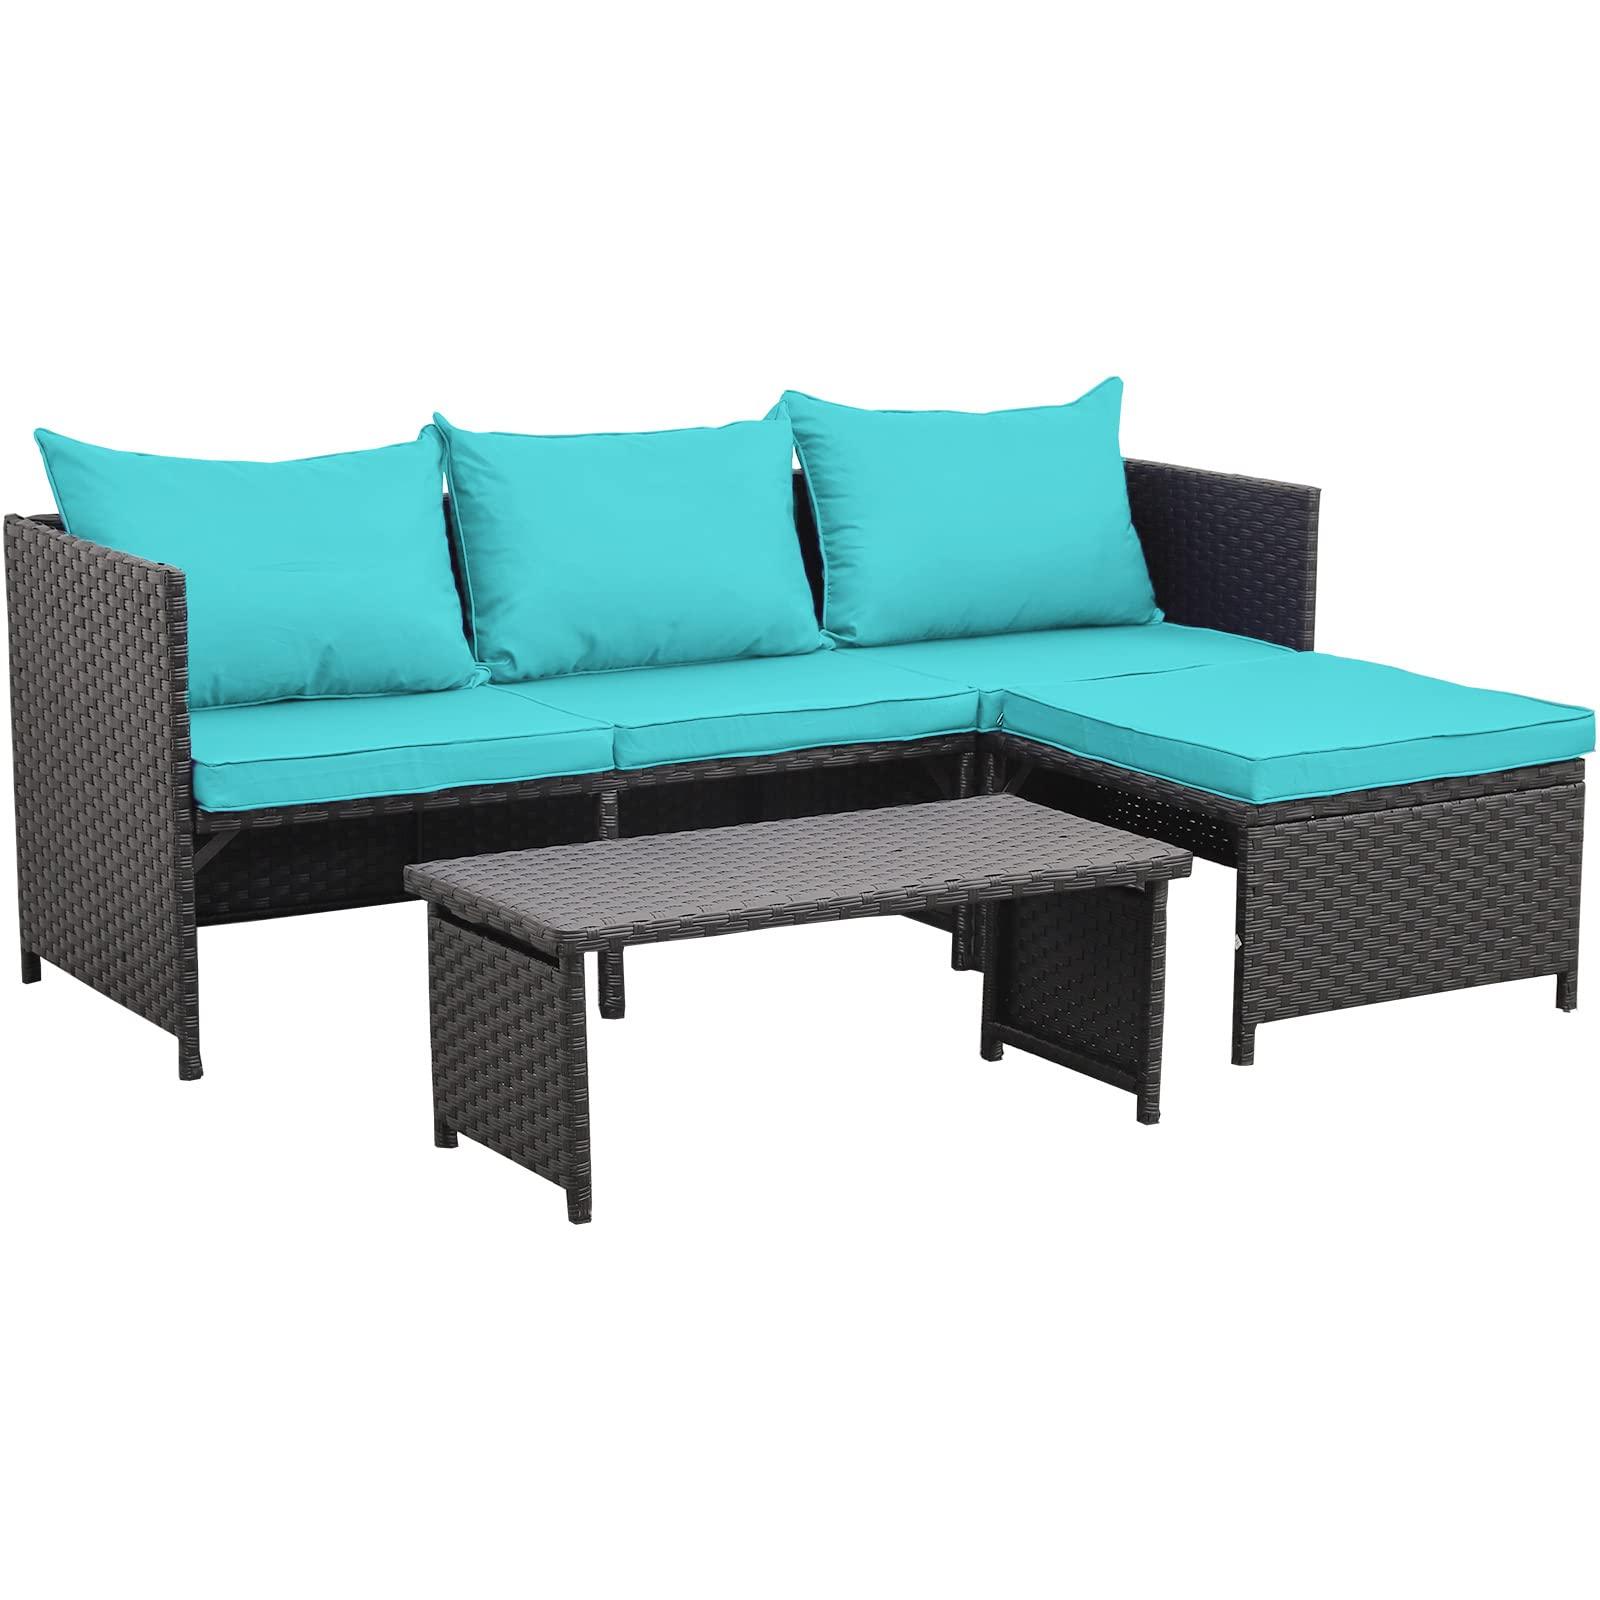 Valita 3-Piece Outdoor PE Rattan Furniture Set Patio Black Wicker Conversation Loveseat Sofa Sectional Couch Turquoise Cushion - CookCave